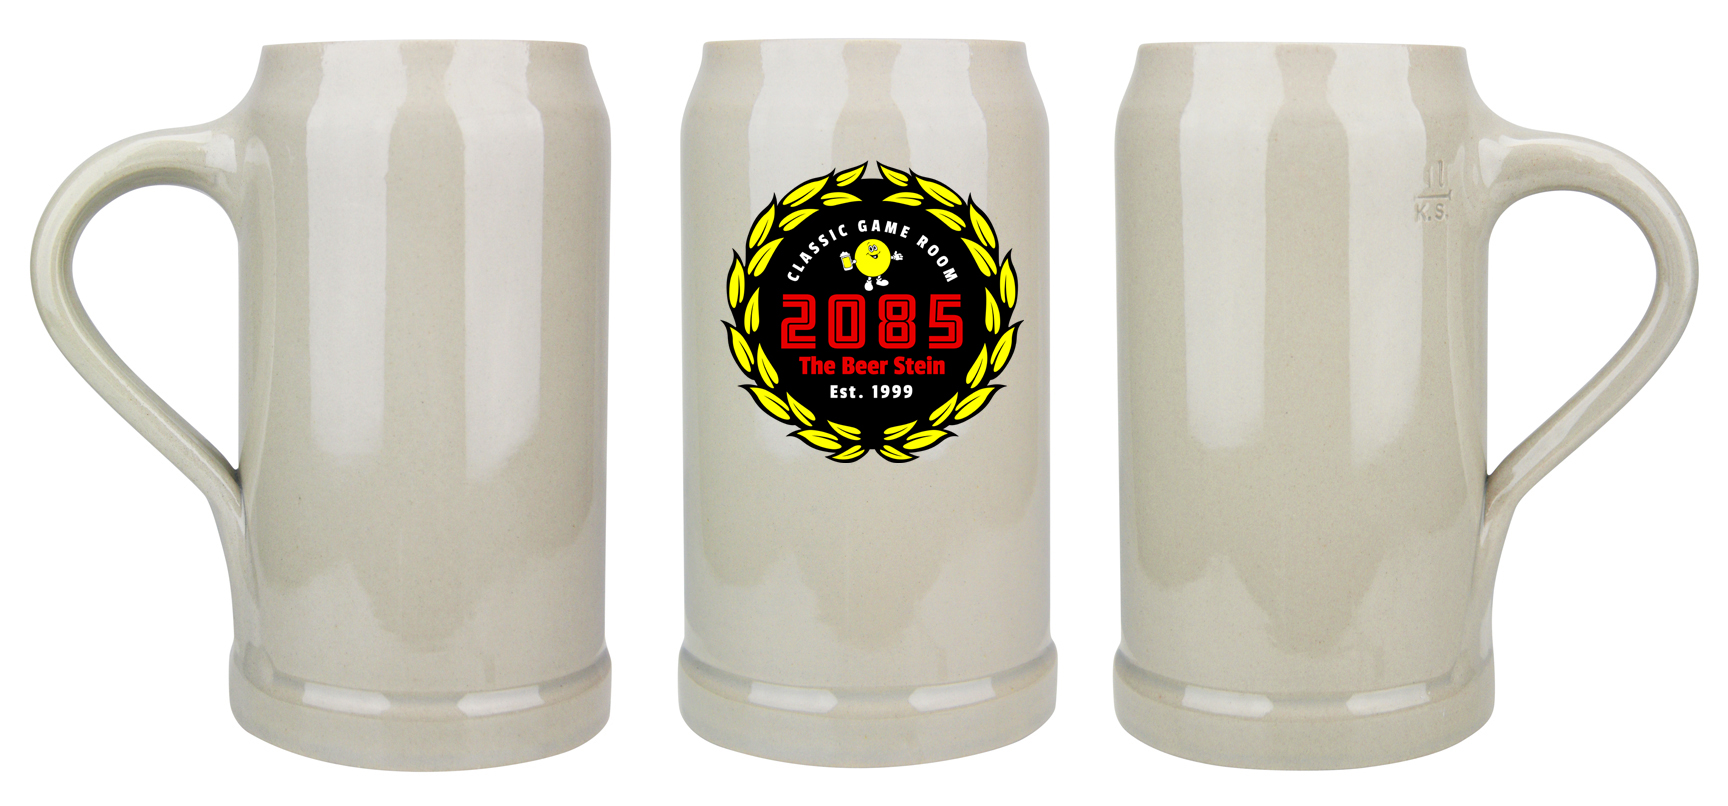 Limited Edition 1 Liter CGR Beer Stein Coming Soon!